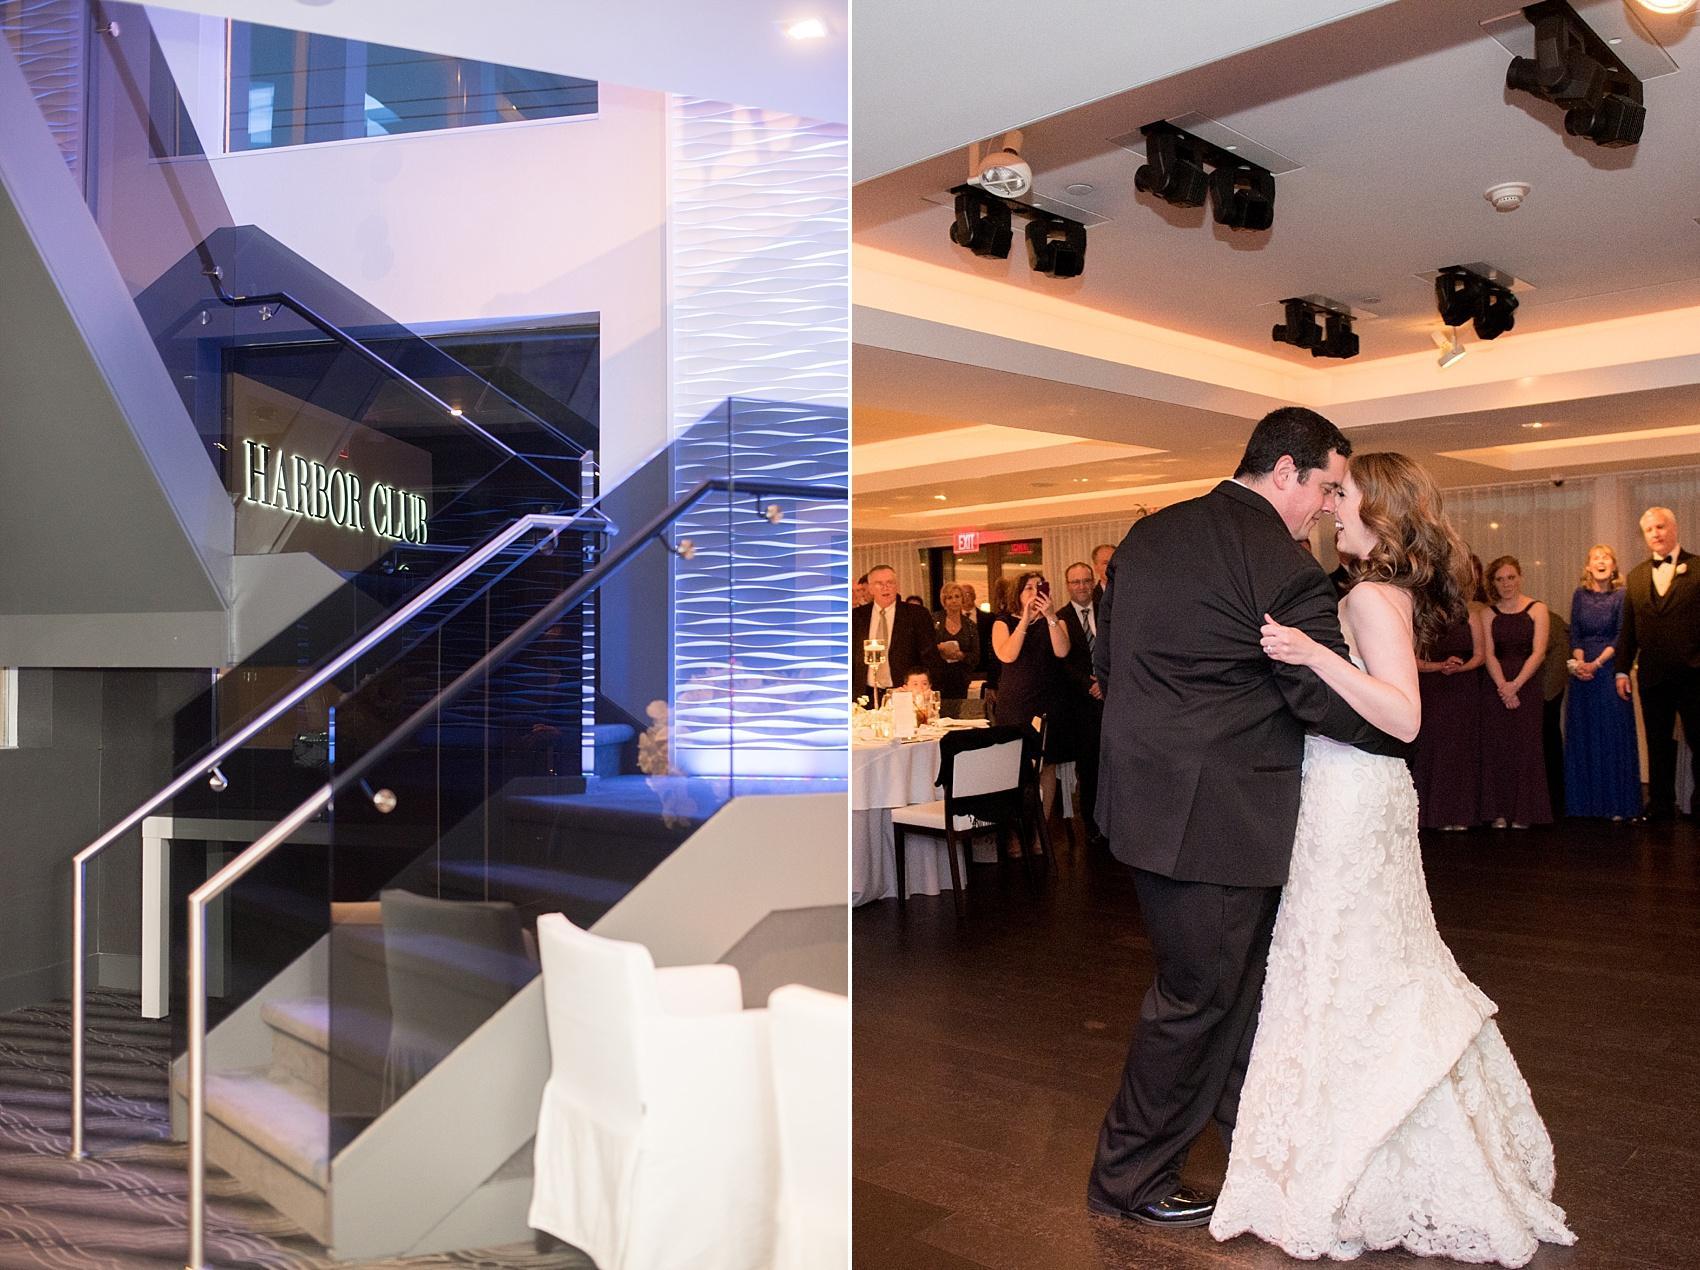 Photos by Mikkel Paige Photography for a wedding at Harbor Club on Long Island. Modern sleek reception.